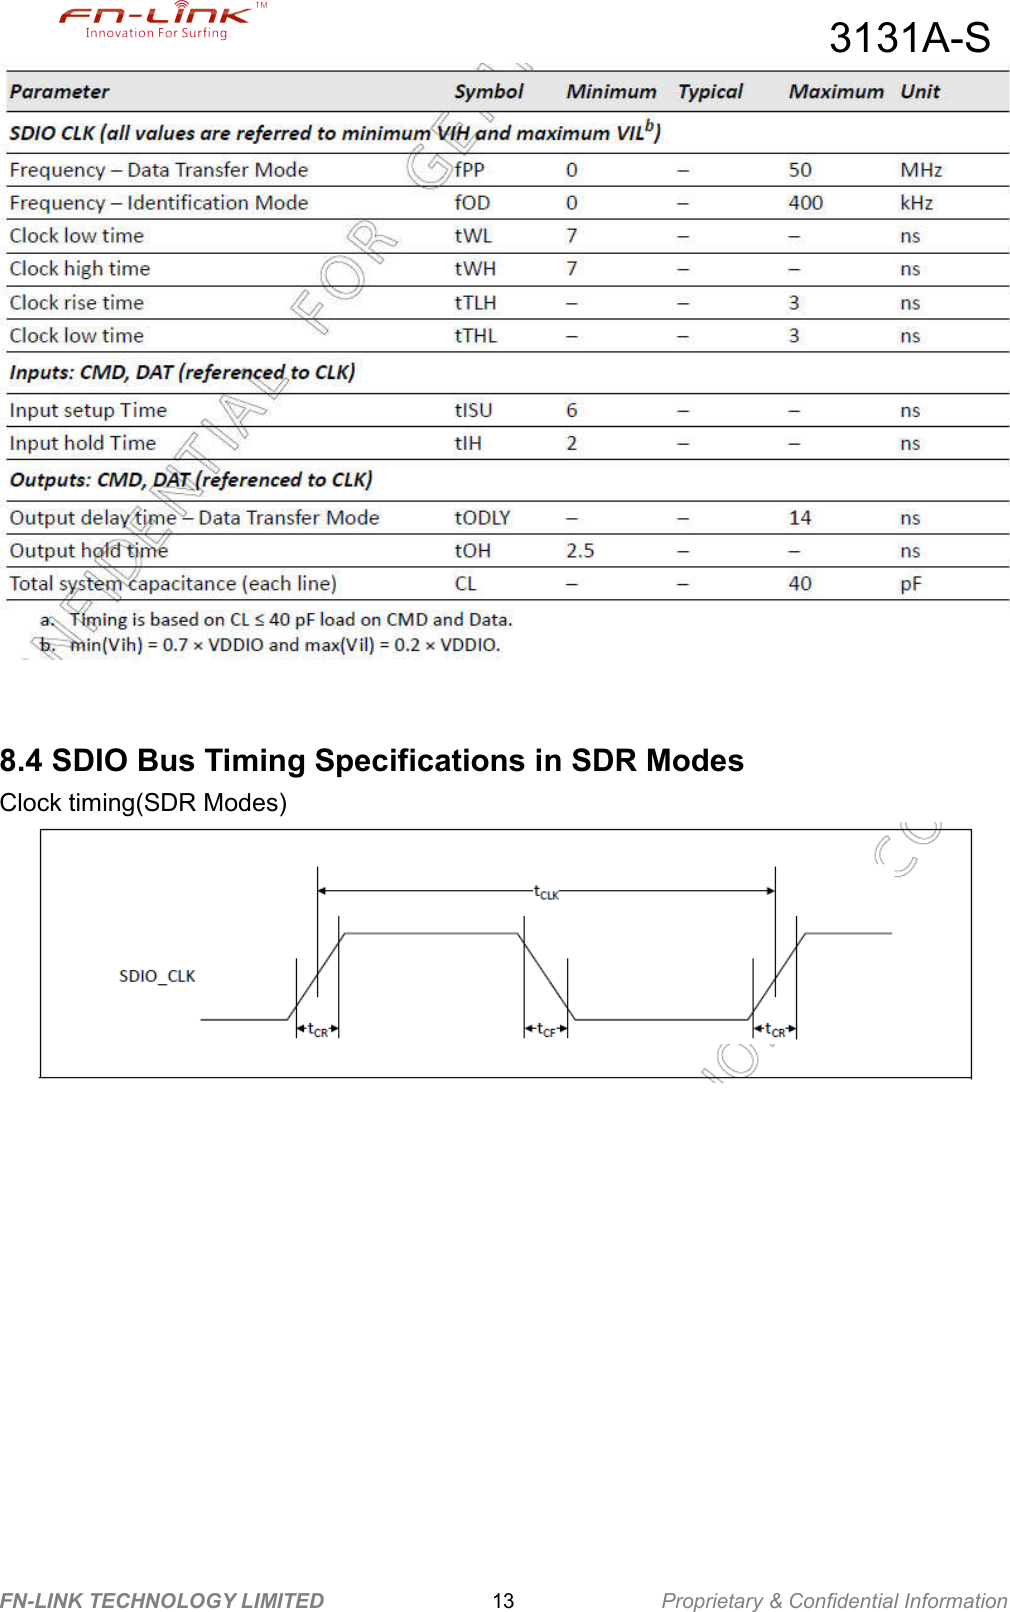                                                  3131A-S FN-LINK TECHNOLOGY LIMITED                13              Proprietary &amp; Confidential Information   8.4 SDIO Bus Timing Specifications in SDR Modes   Clock timing(SDR Modes)    